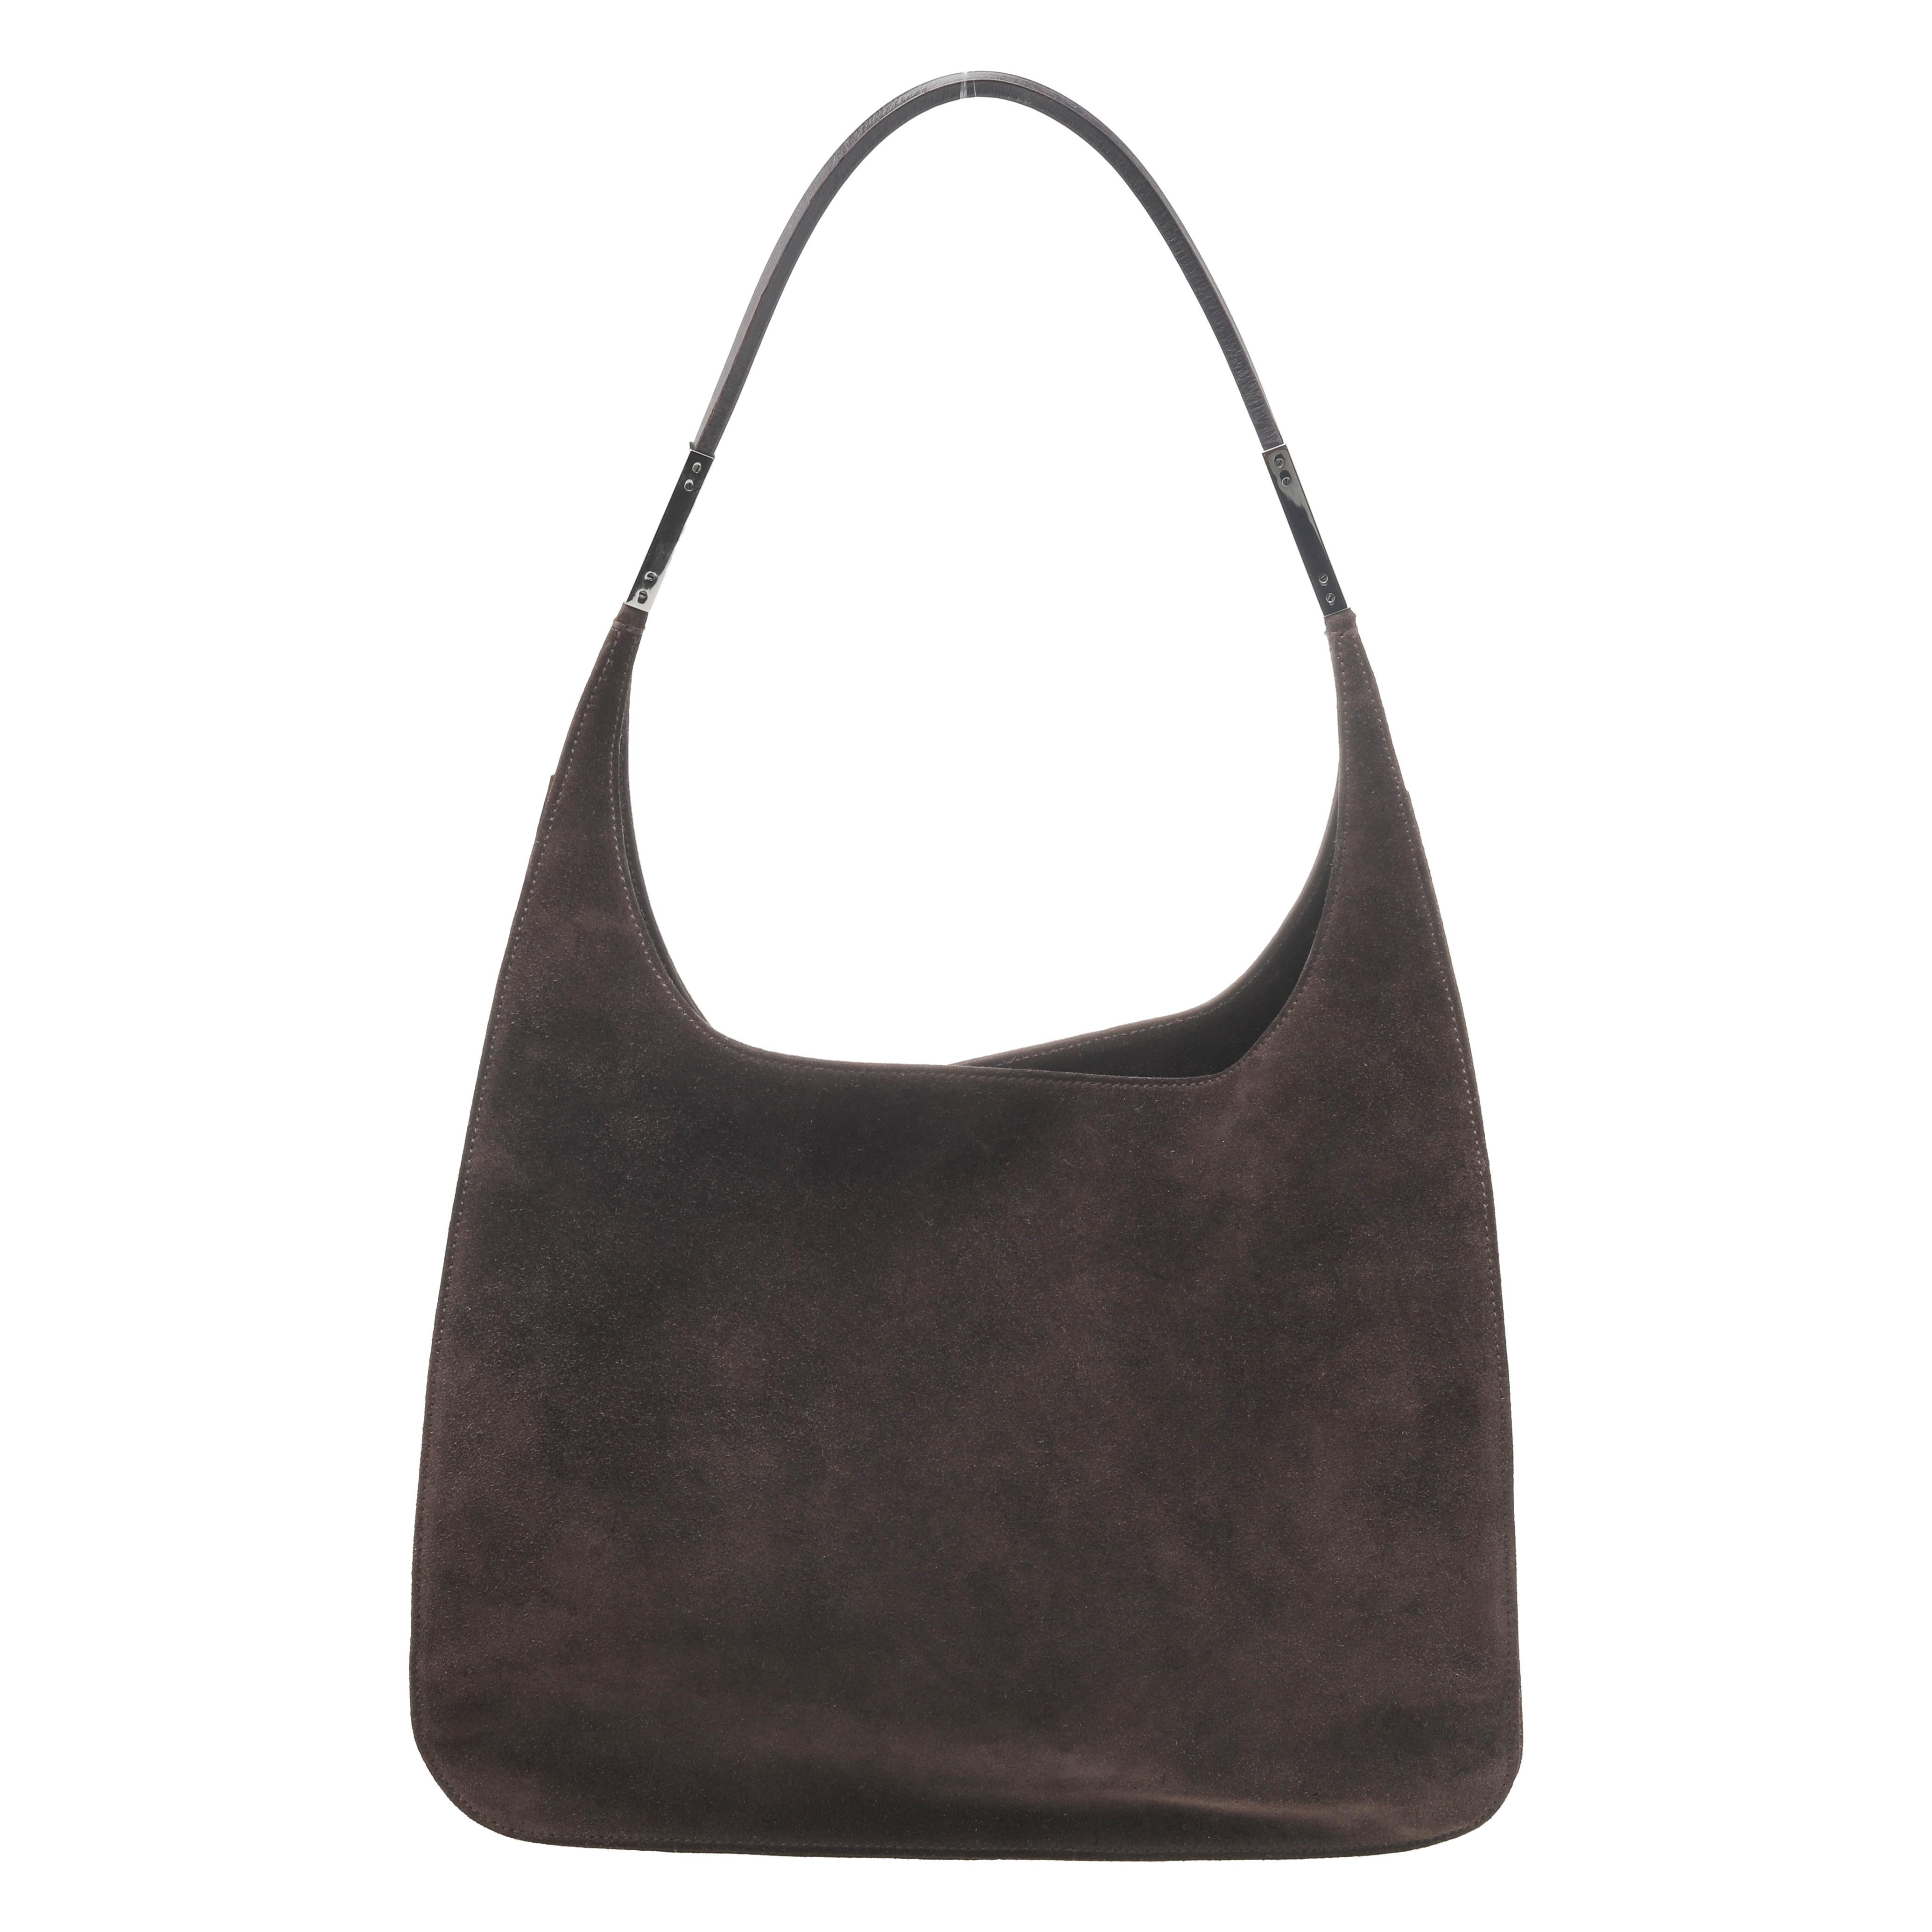 This simple and striking shoulder bag by Gucci is a creation that will deliver chic looks every time. It has been crafted from dark brown suede and leather. It has a single strap, a zip closure, and a spacious leather interior. It is finished with